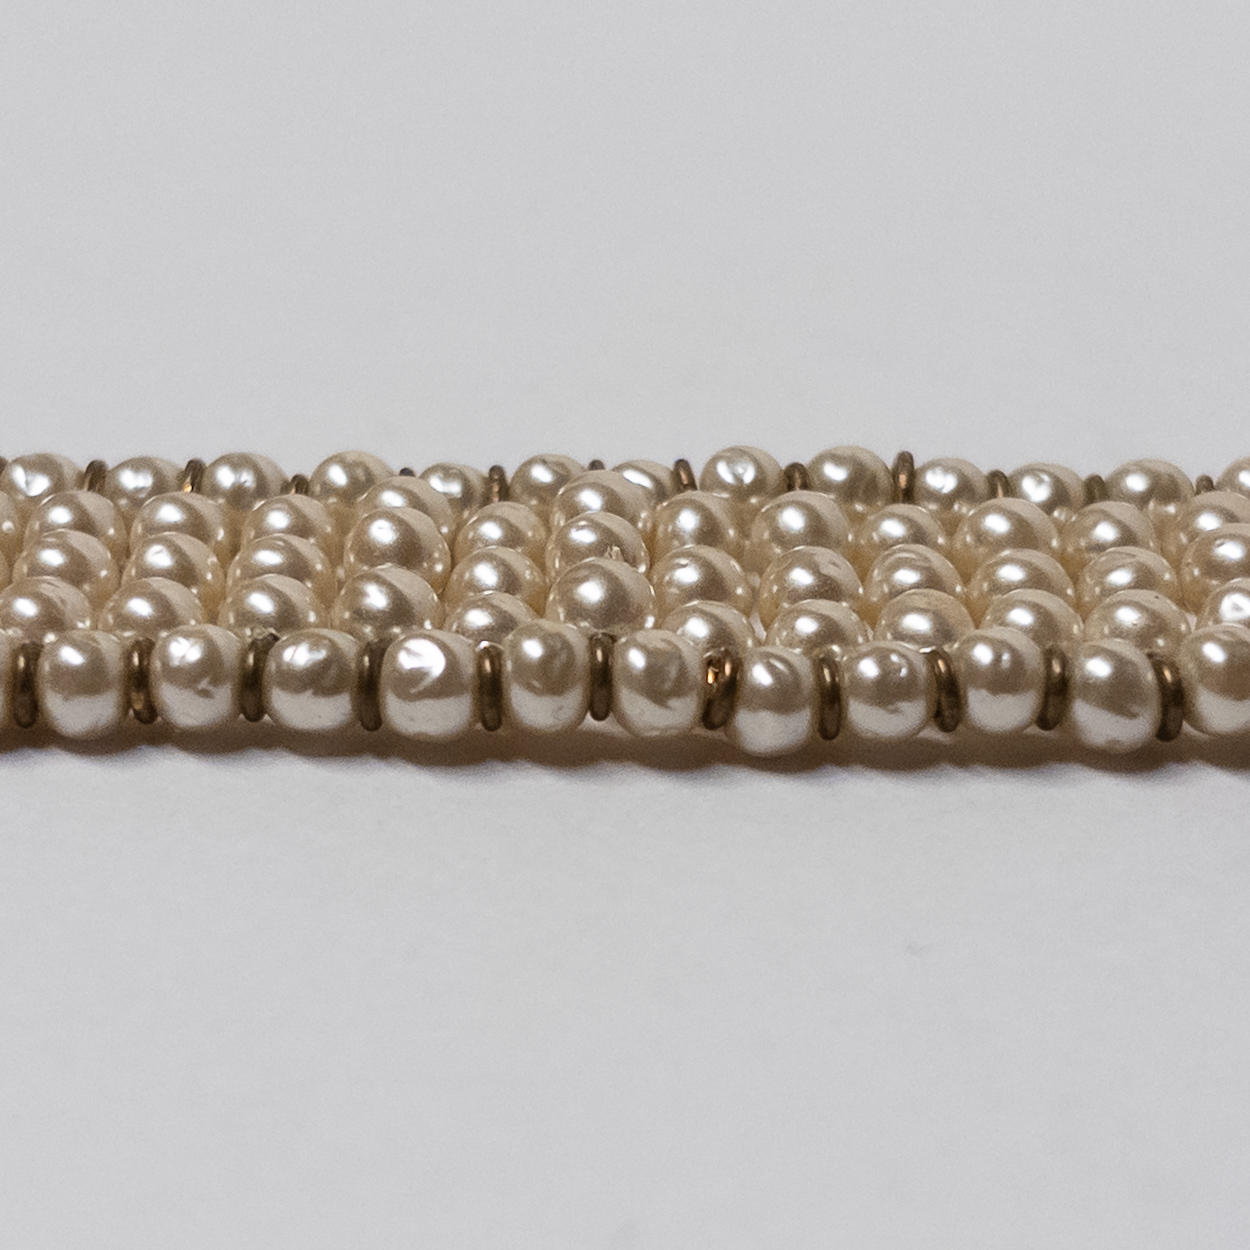 Miriam Haskell Four Strand 'Pearl' Choker Necklace